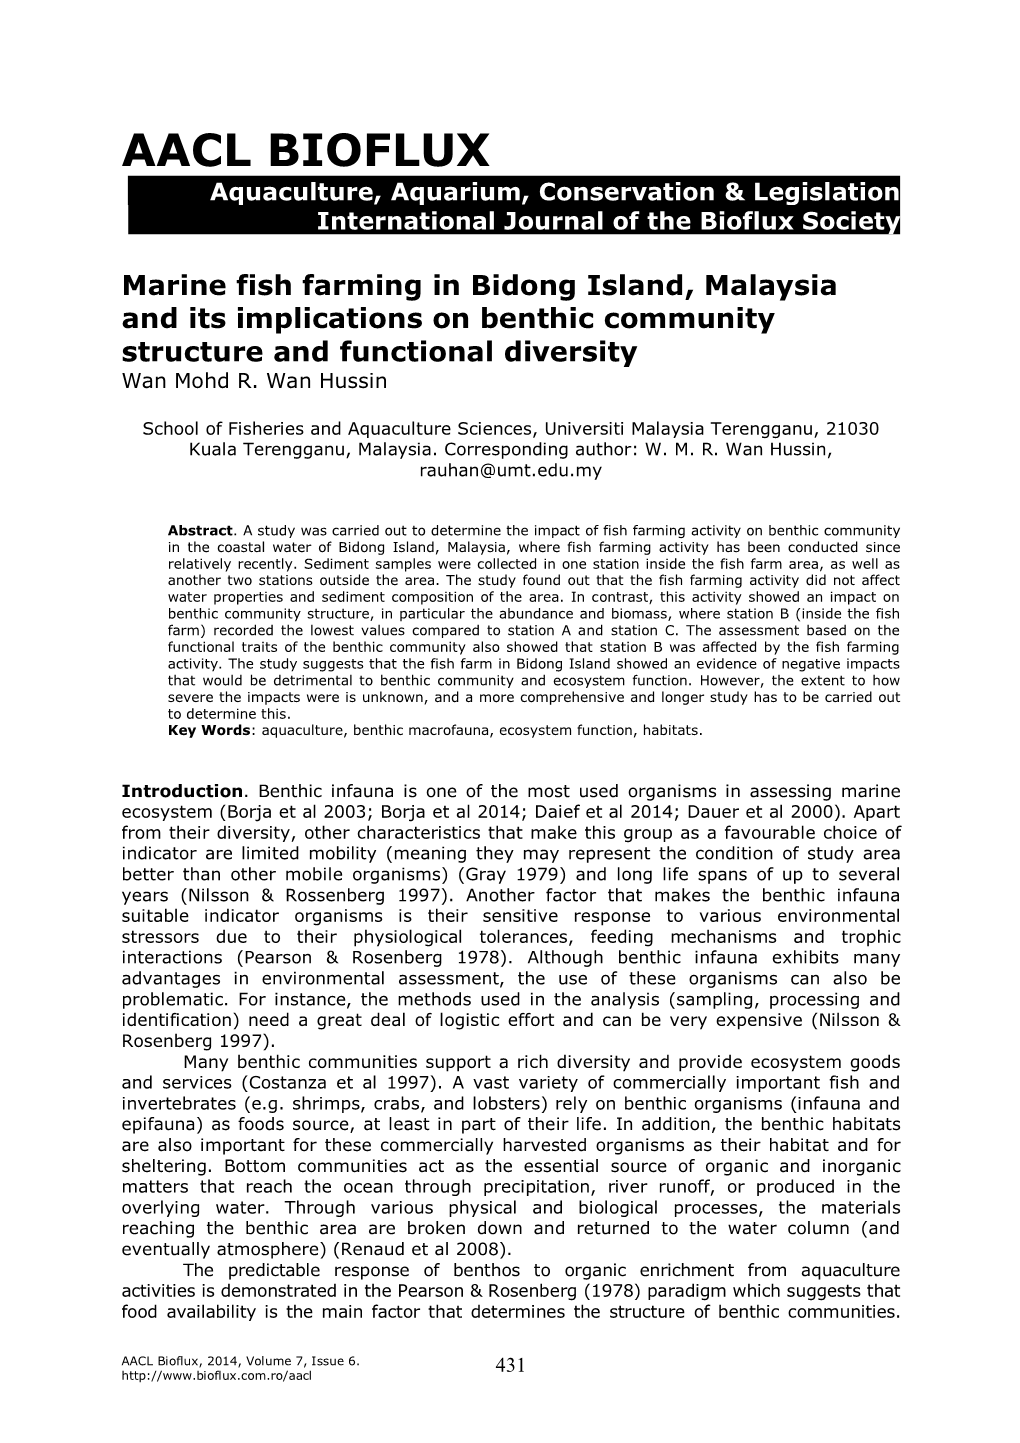 Marine Fish Farming in Bidong Island, Malaysia and Its Implications on Benthic Community Structure and Functional Diversity Wan Mohd R